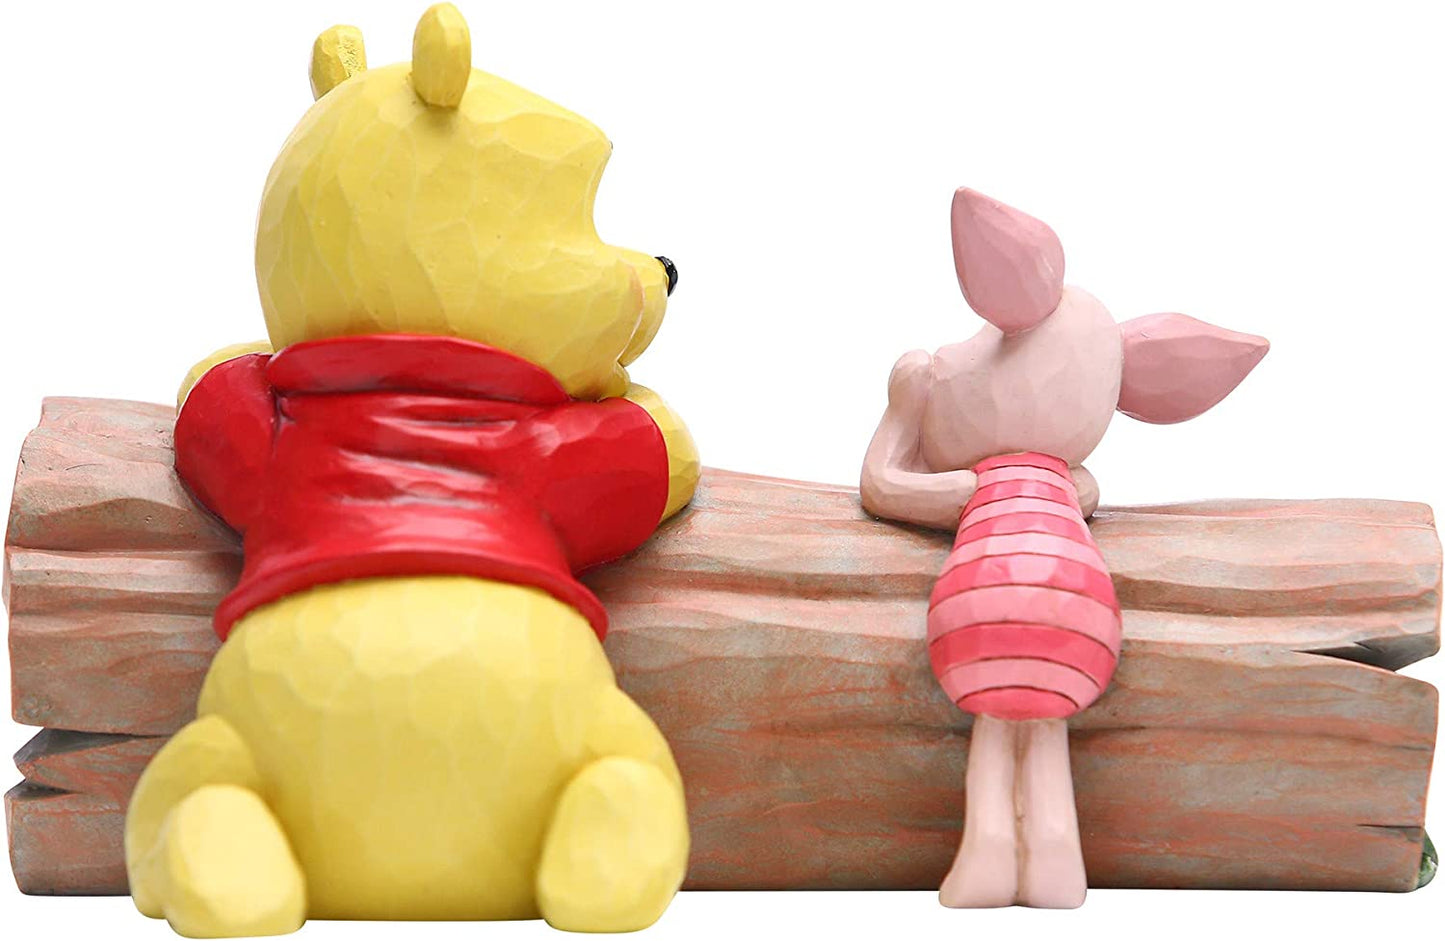 Jim Shore Disney Traditions Winnie the Pooh and Piglet